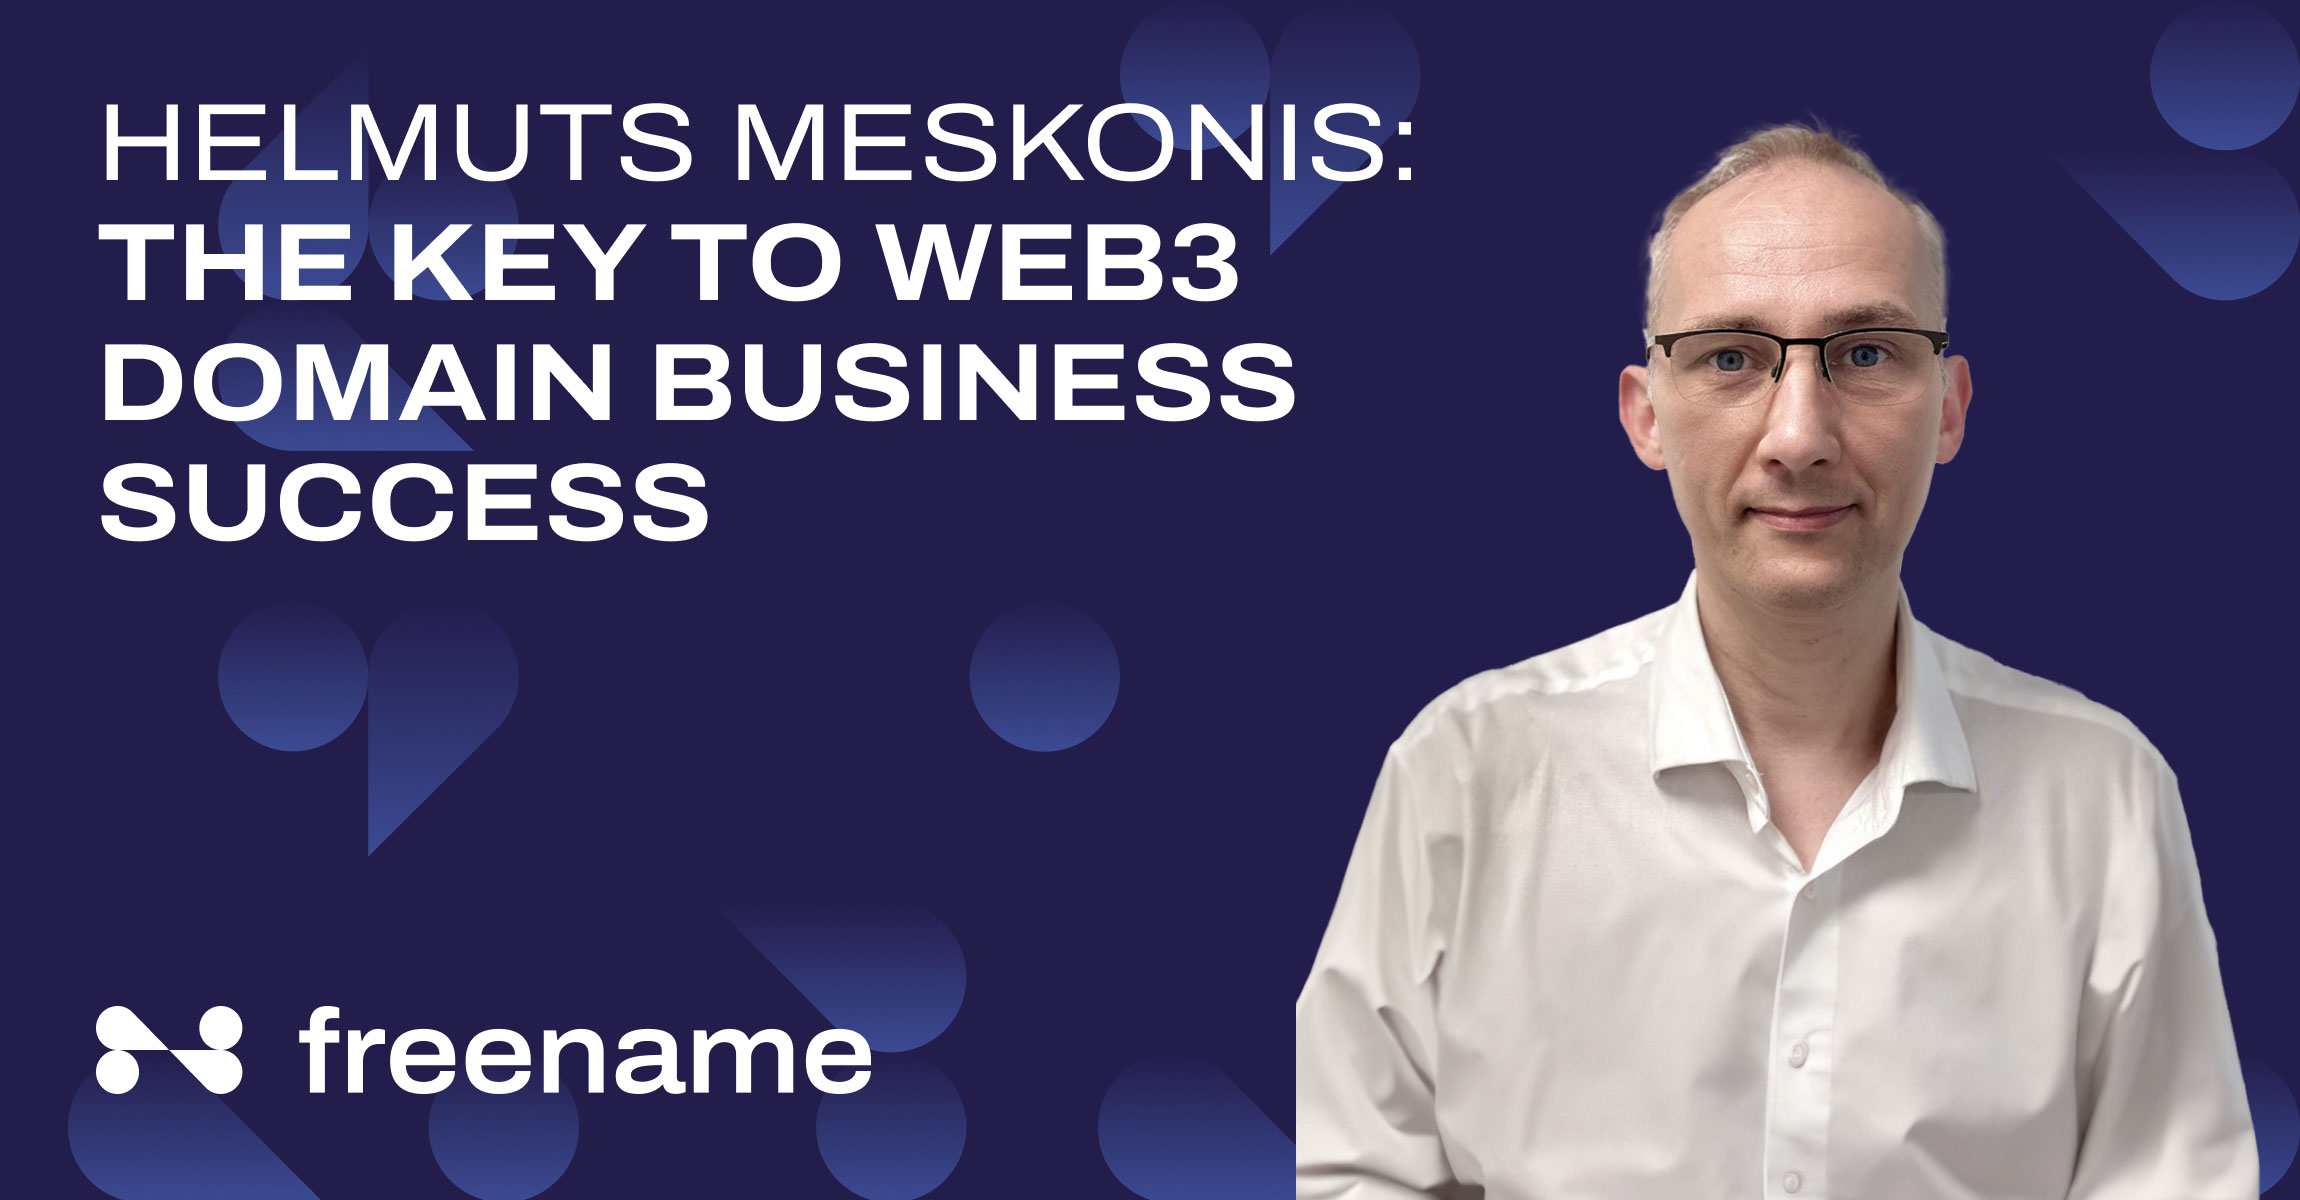 Helmuts Meskonis: The Key to Web3 Domain Business Success